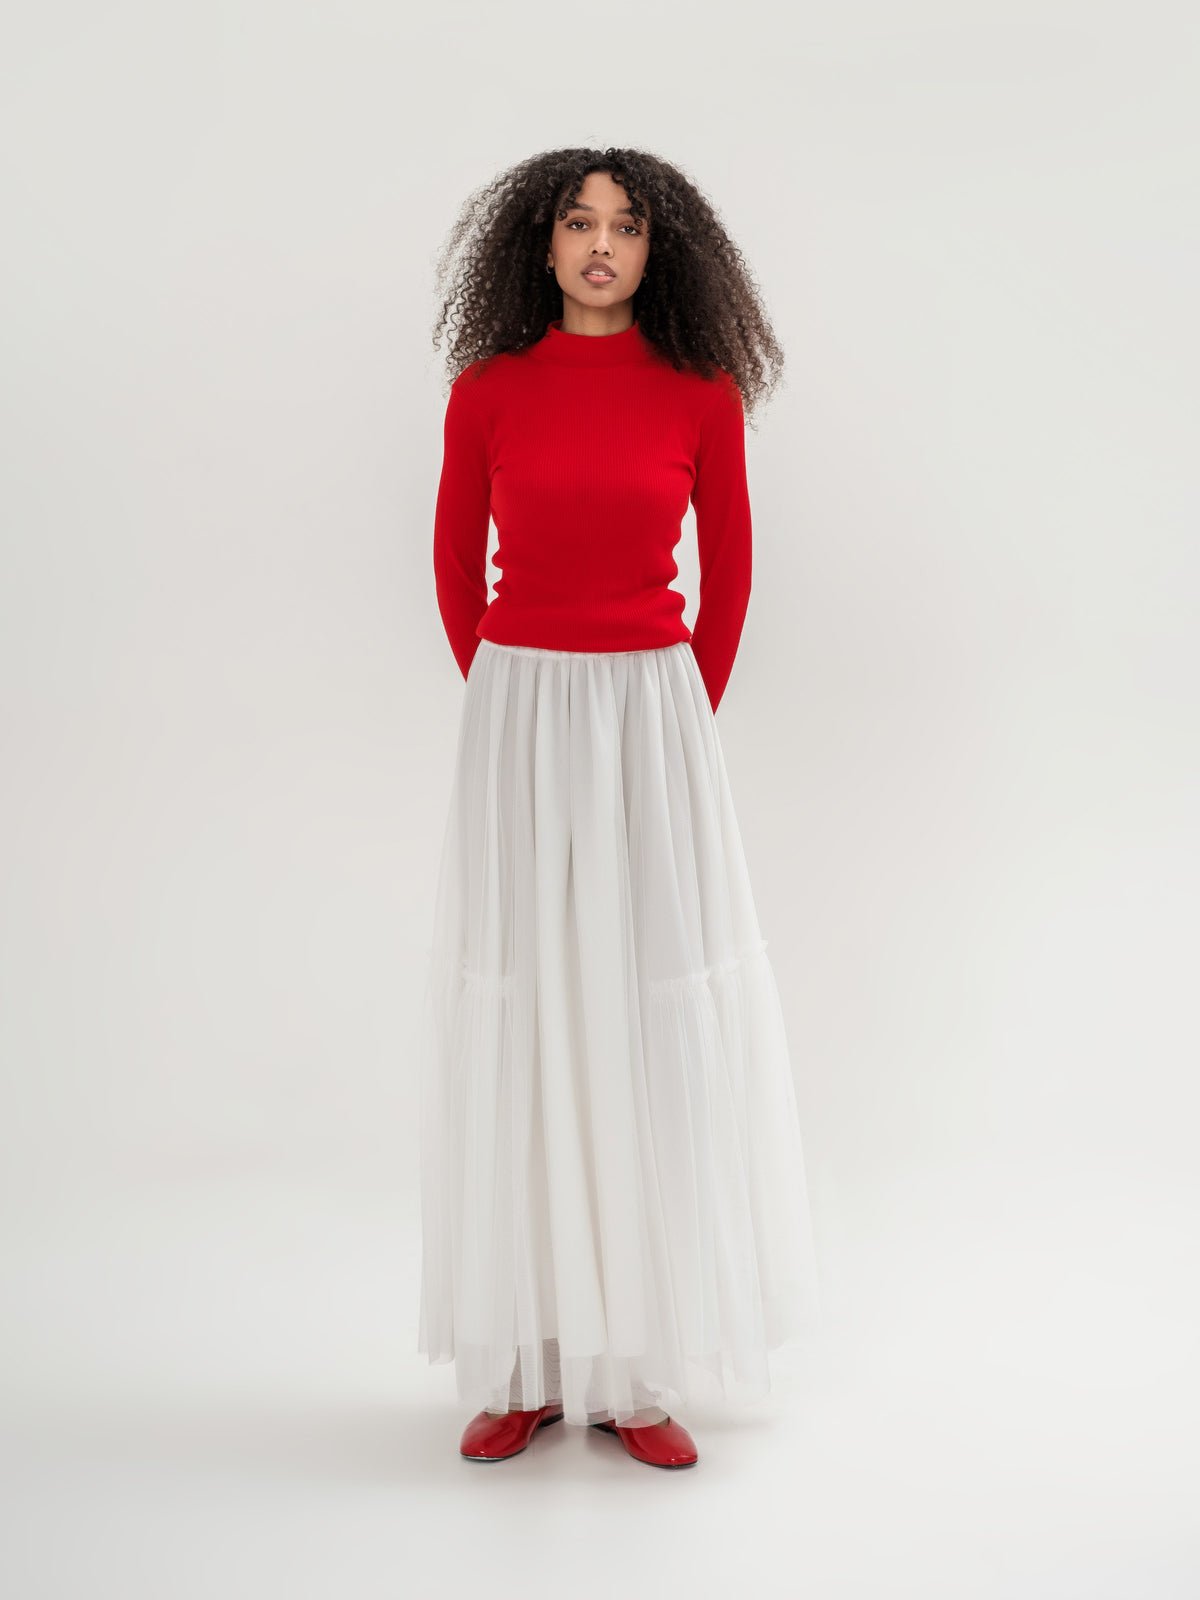 White tulle lined skirt with elastic waist one size